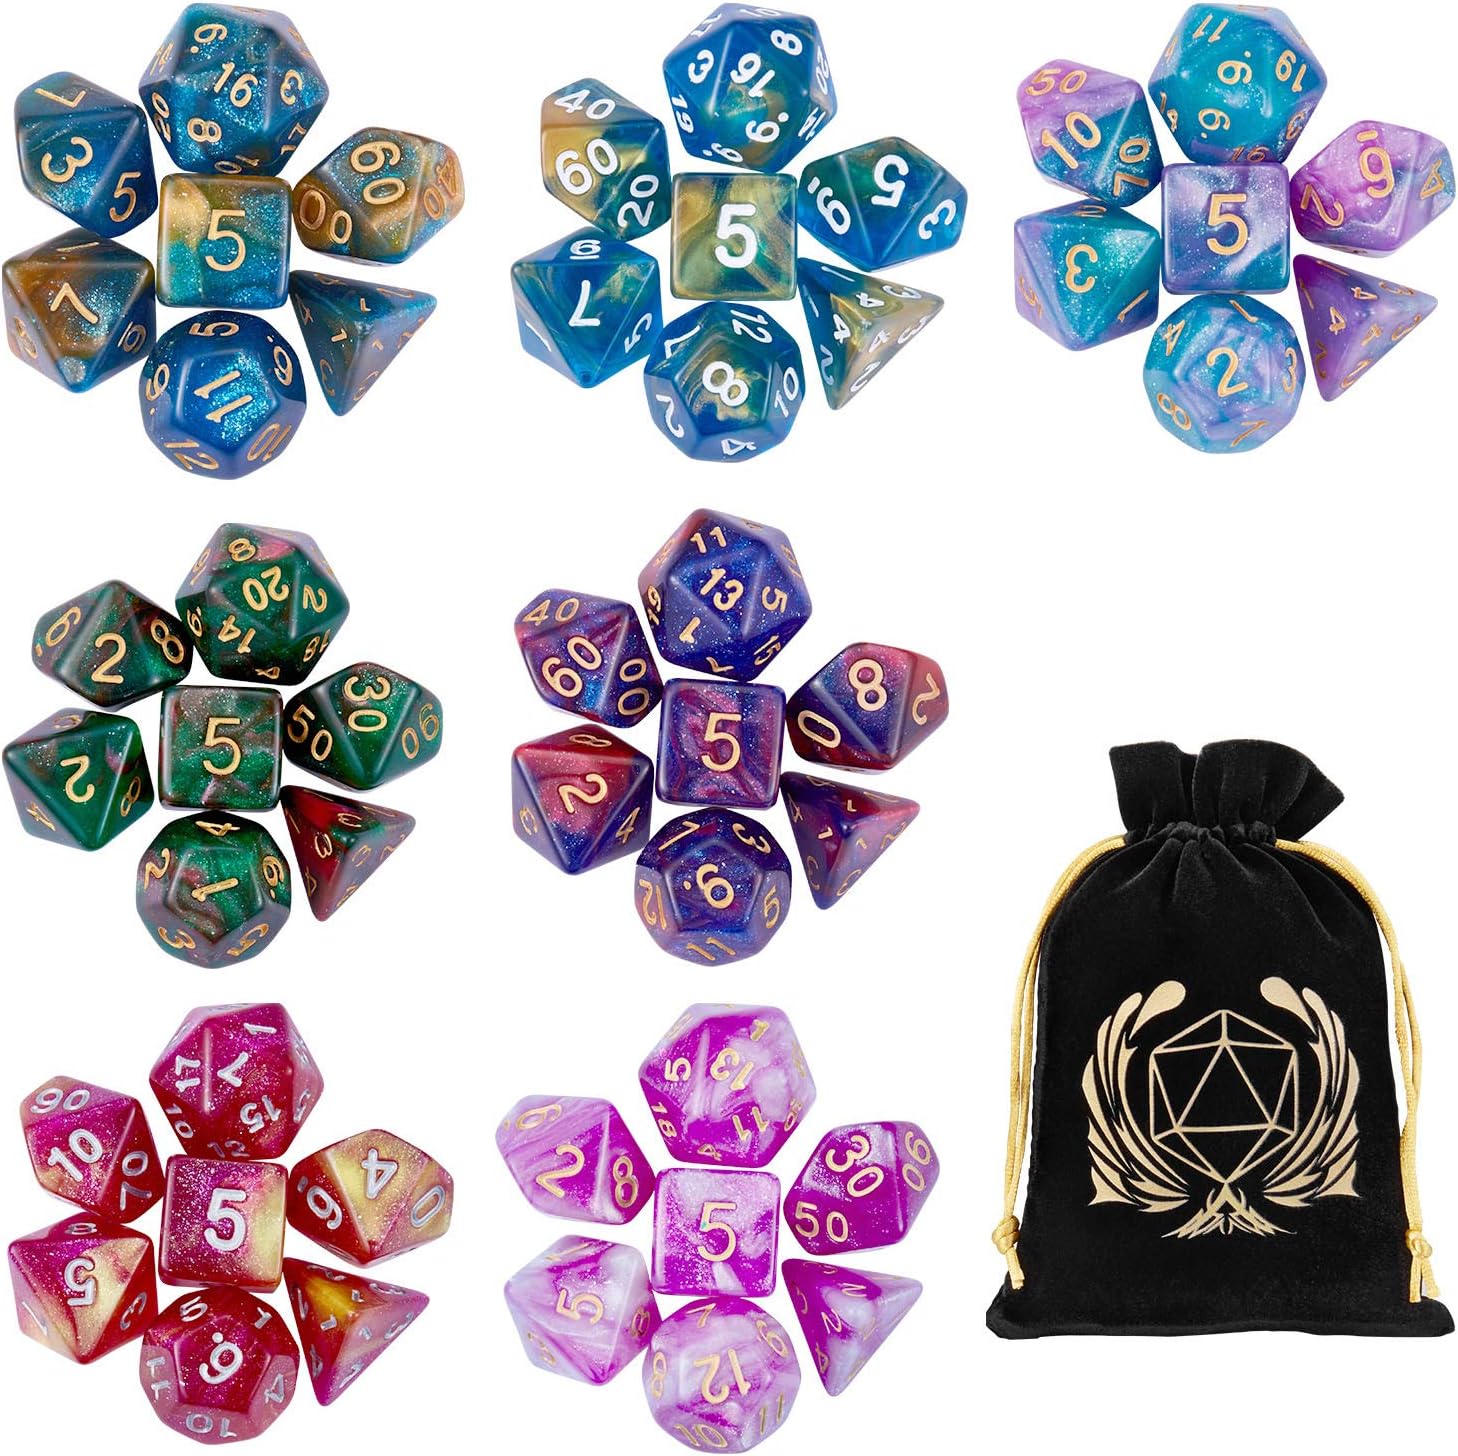 Sparkly D20 Set of 7 Polyhedral Dice for DND Role Playing Games 